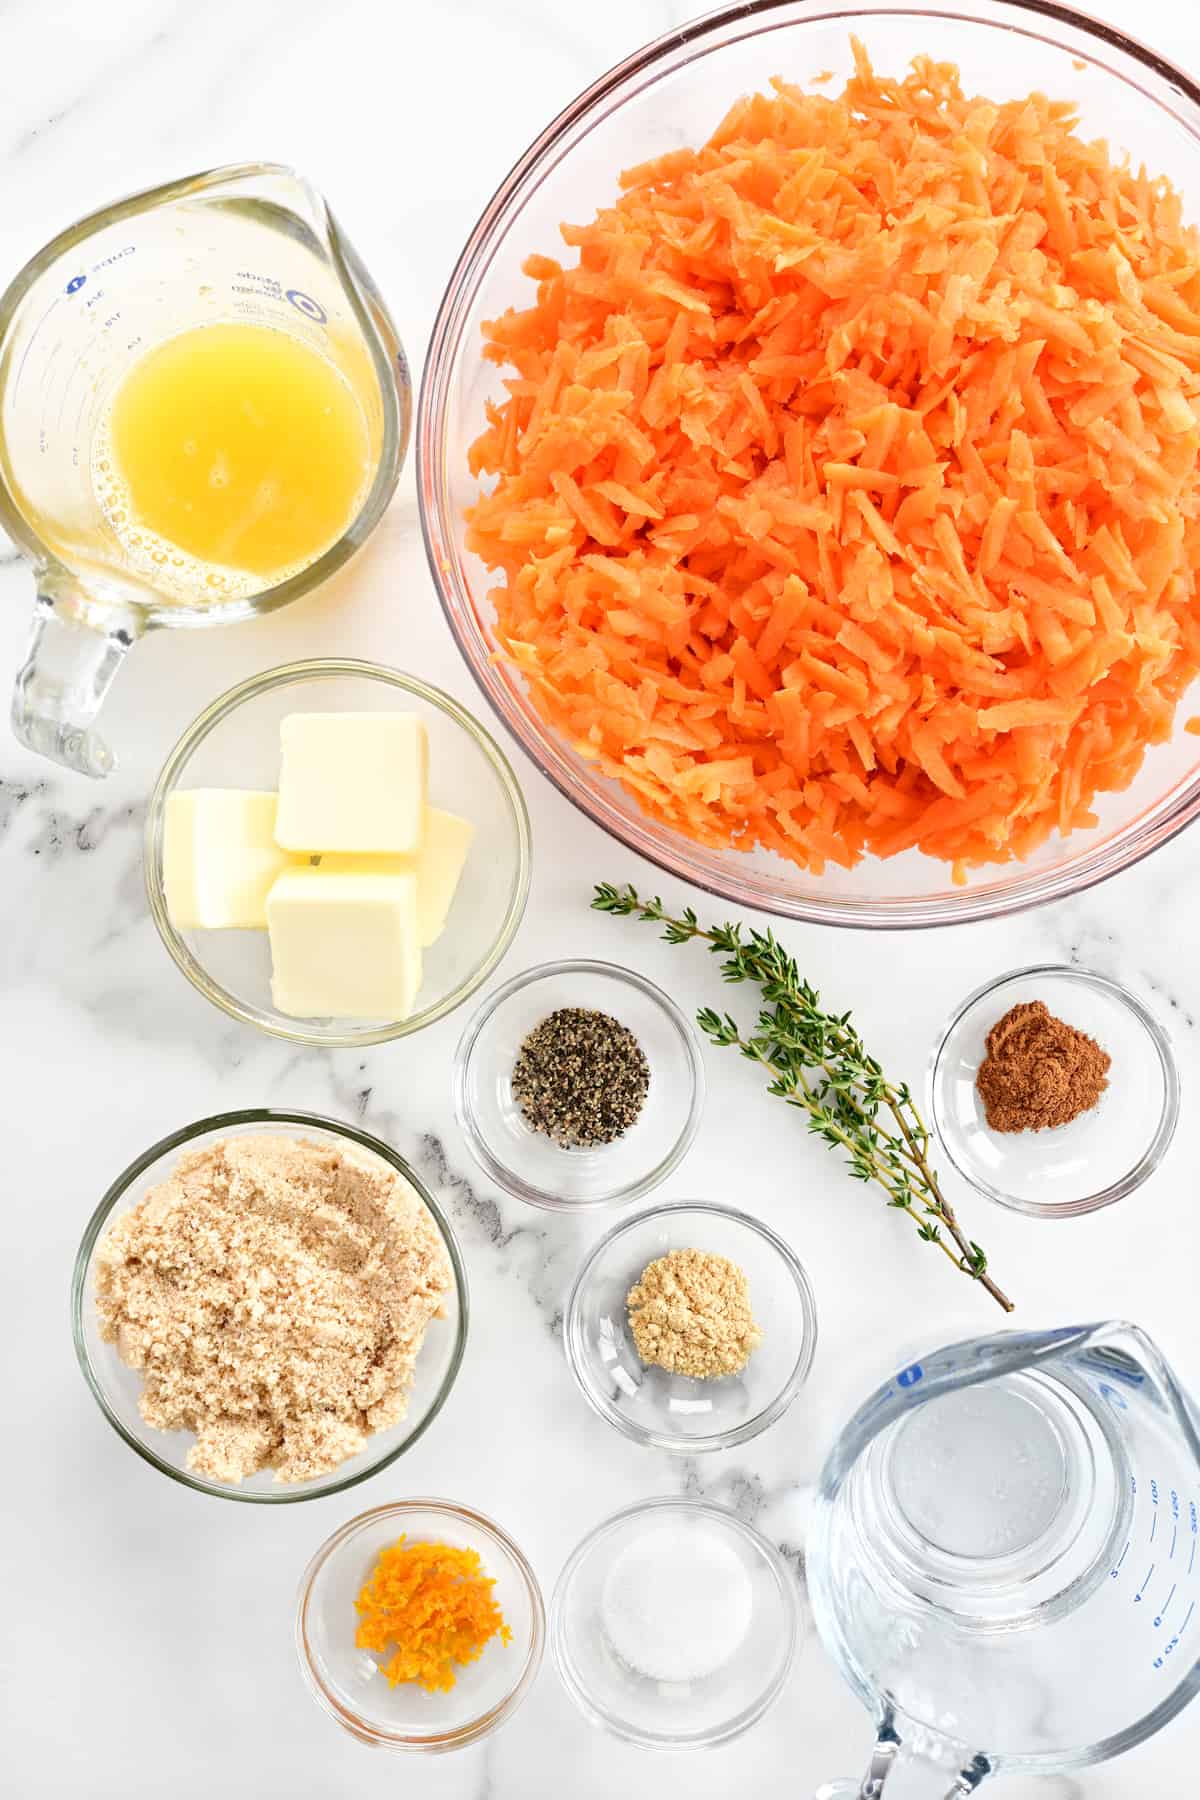 3 Easy Ways to Make Shredded Carrots - The Feathered Nester